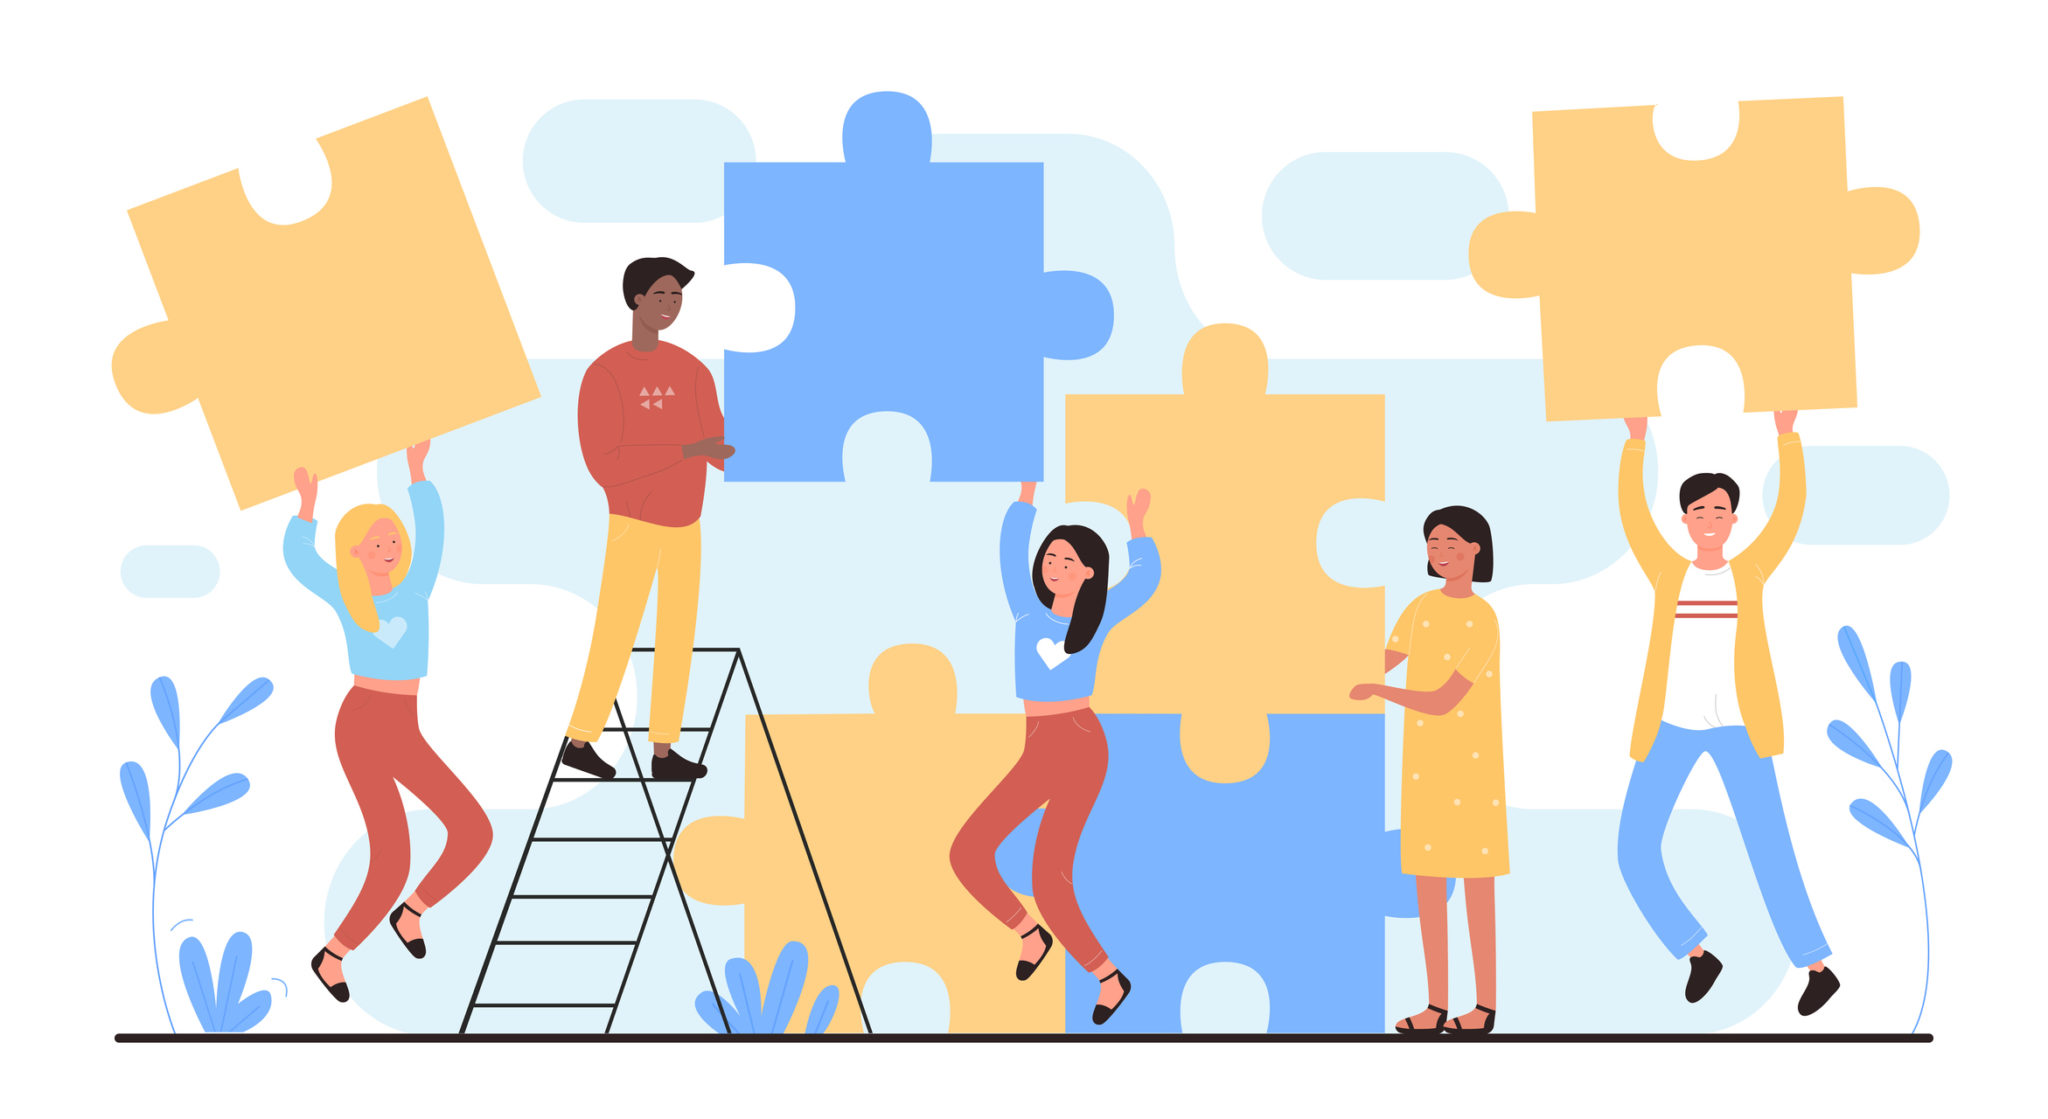 People connect puzzles flat vector illustration. Cartoon happy man woman young team of characters connecting puzzle pieces together. Teamwork building, successful partnership concept isolated on white